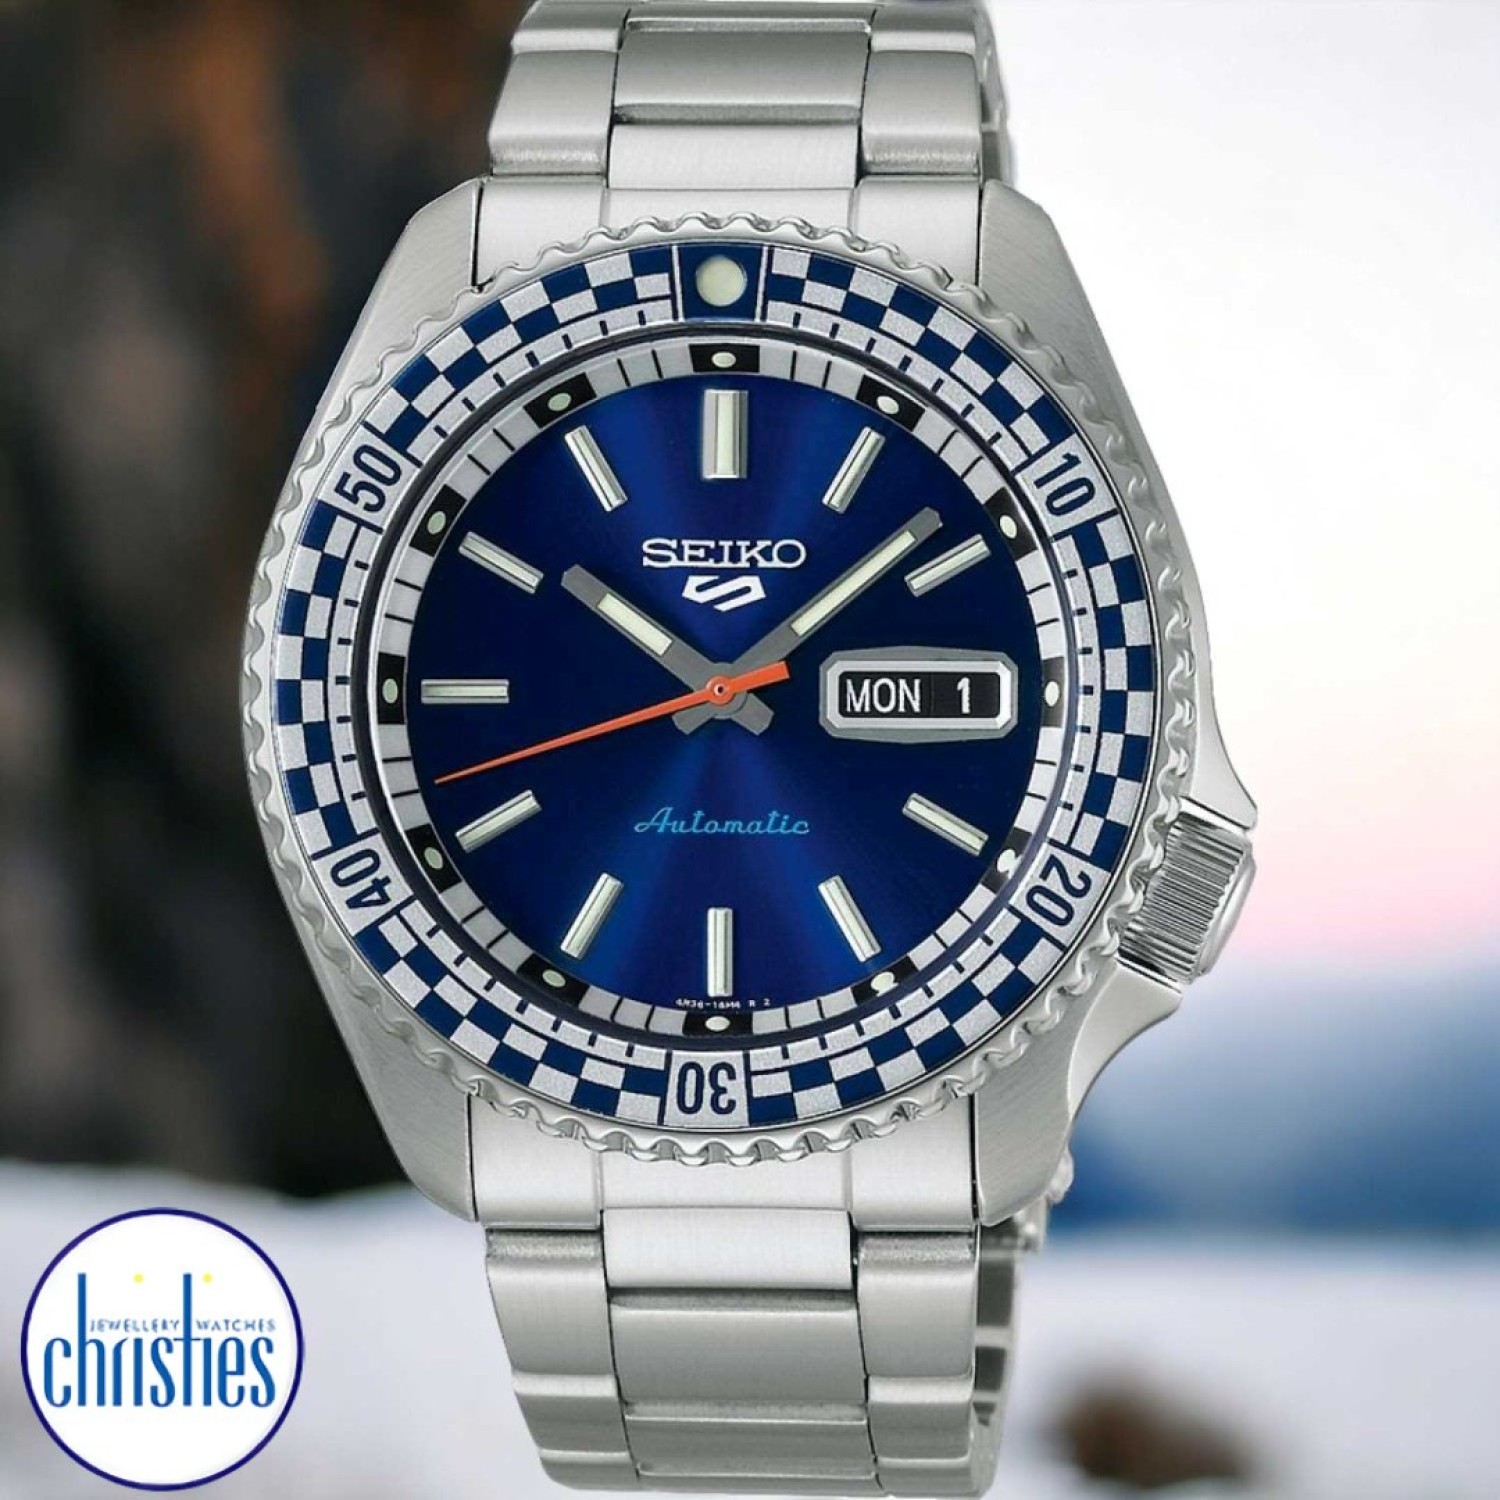 SRPK65K Seiko 5 Sports Style Watch SRPK65K1 Seiko Watches NZ |  Seiko's commitment to craftsmanship ensures that each watch is made with precision and attention to detail.